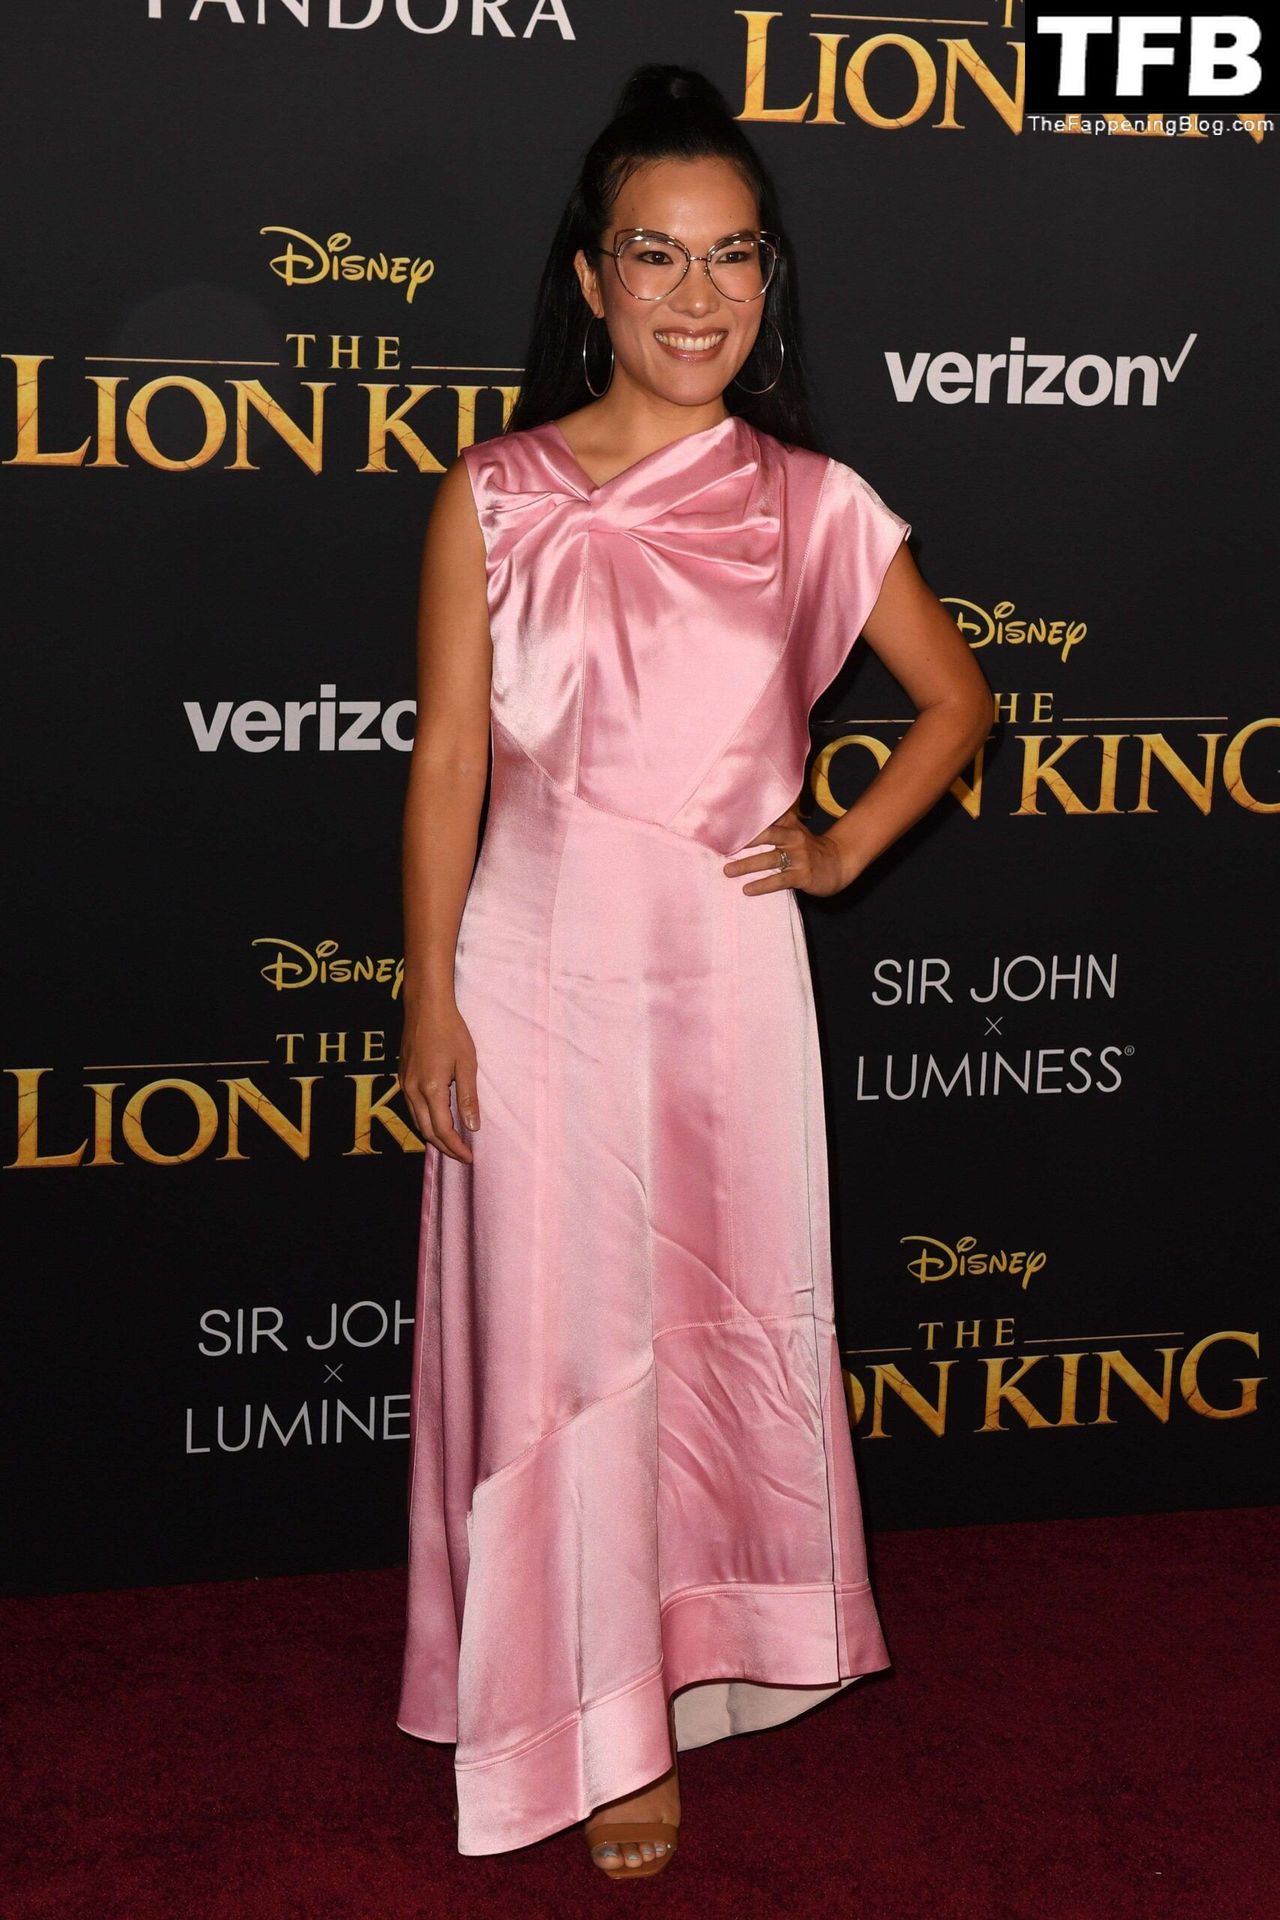 Check out Ali Wong’s topless, sexy social media, magazine, red carpet photo...